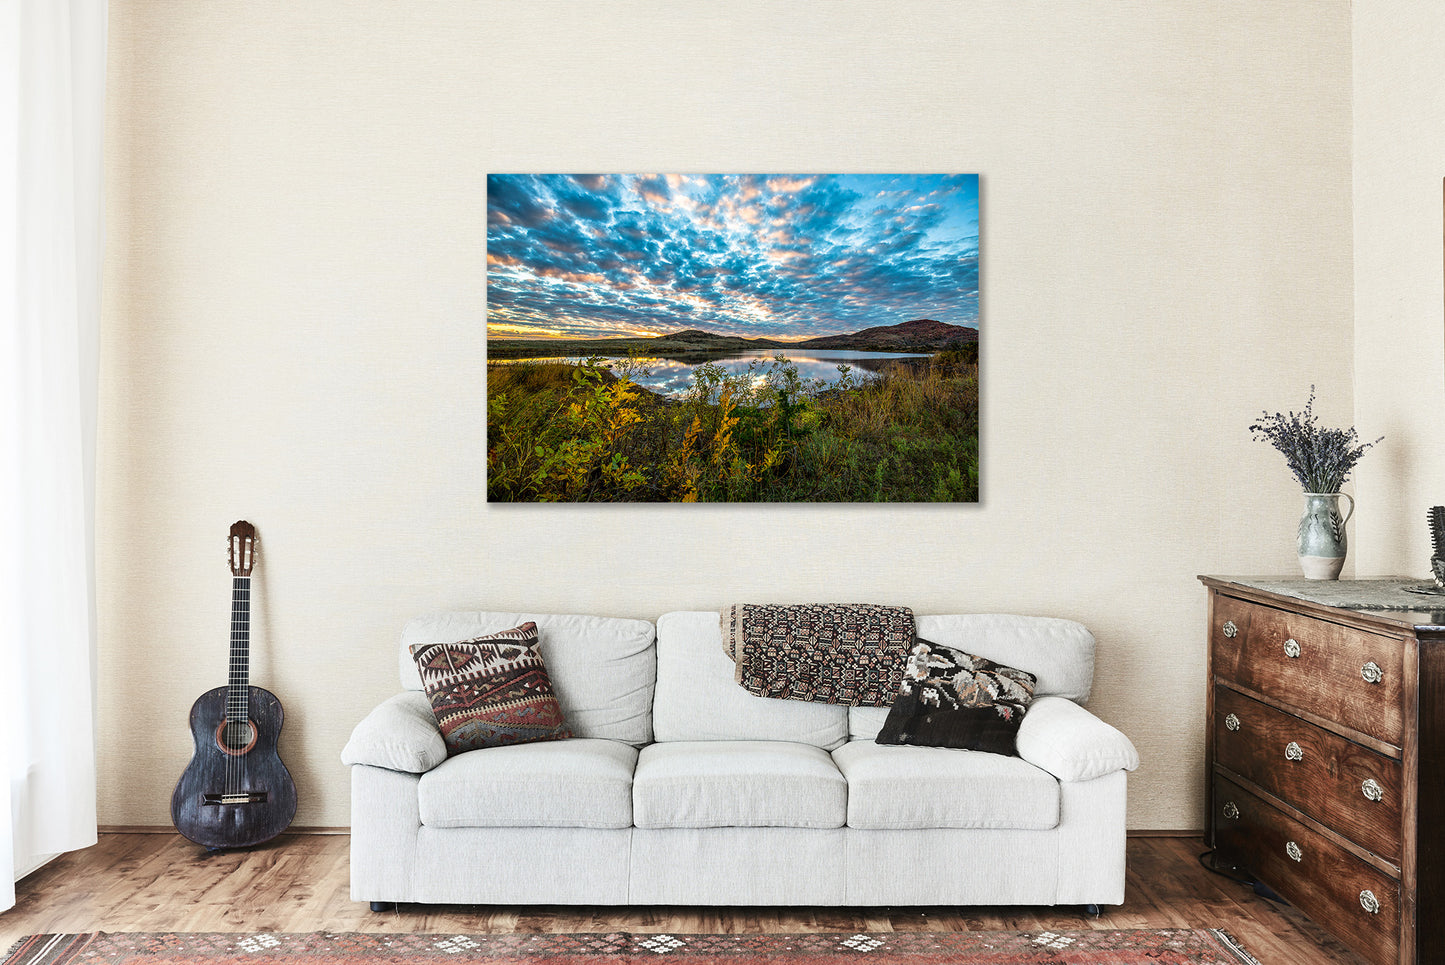 Wichita Mountains Canvas Wall Art (Ready to Hang) Gallery Wrap of Scenic Sky Over Lake at Sunset on Autumn Evening in Oklahoma Great Plains Photography Nature Decor